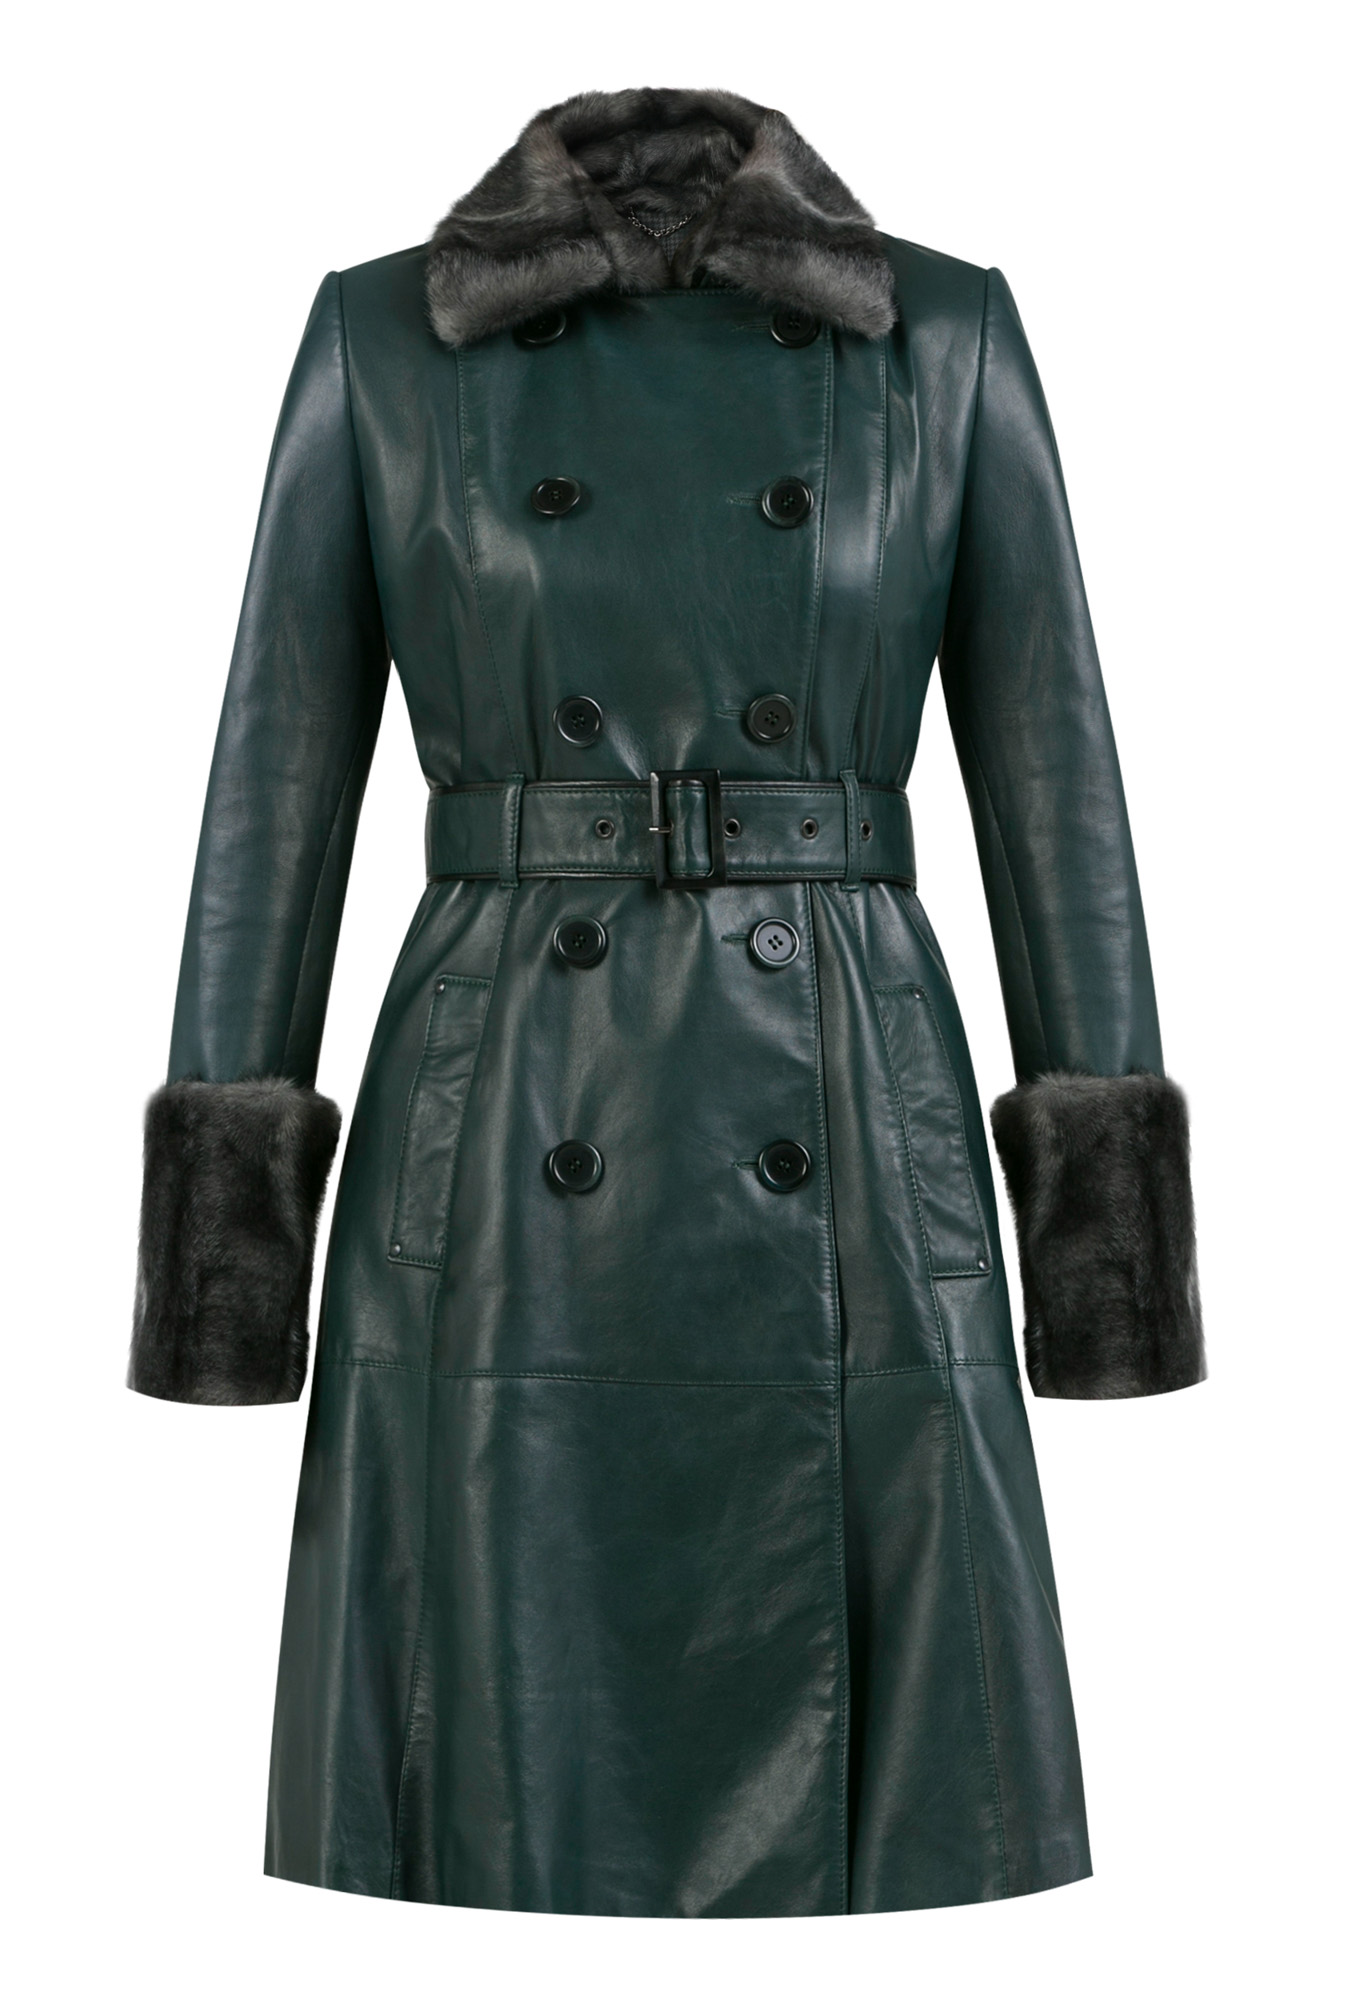 leather coat, leather coat with fur, bottle green leather coat, Italian leather coat, natural leather coat, natural leather green coat, leather coats, leather coat by rieske, double-breasted leather coat, premium